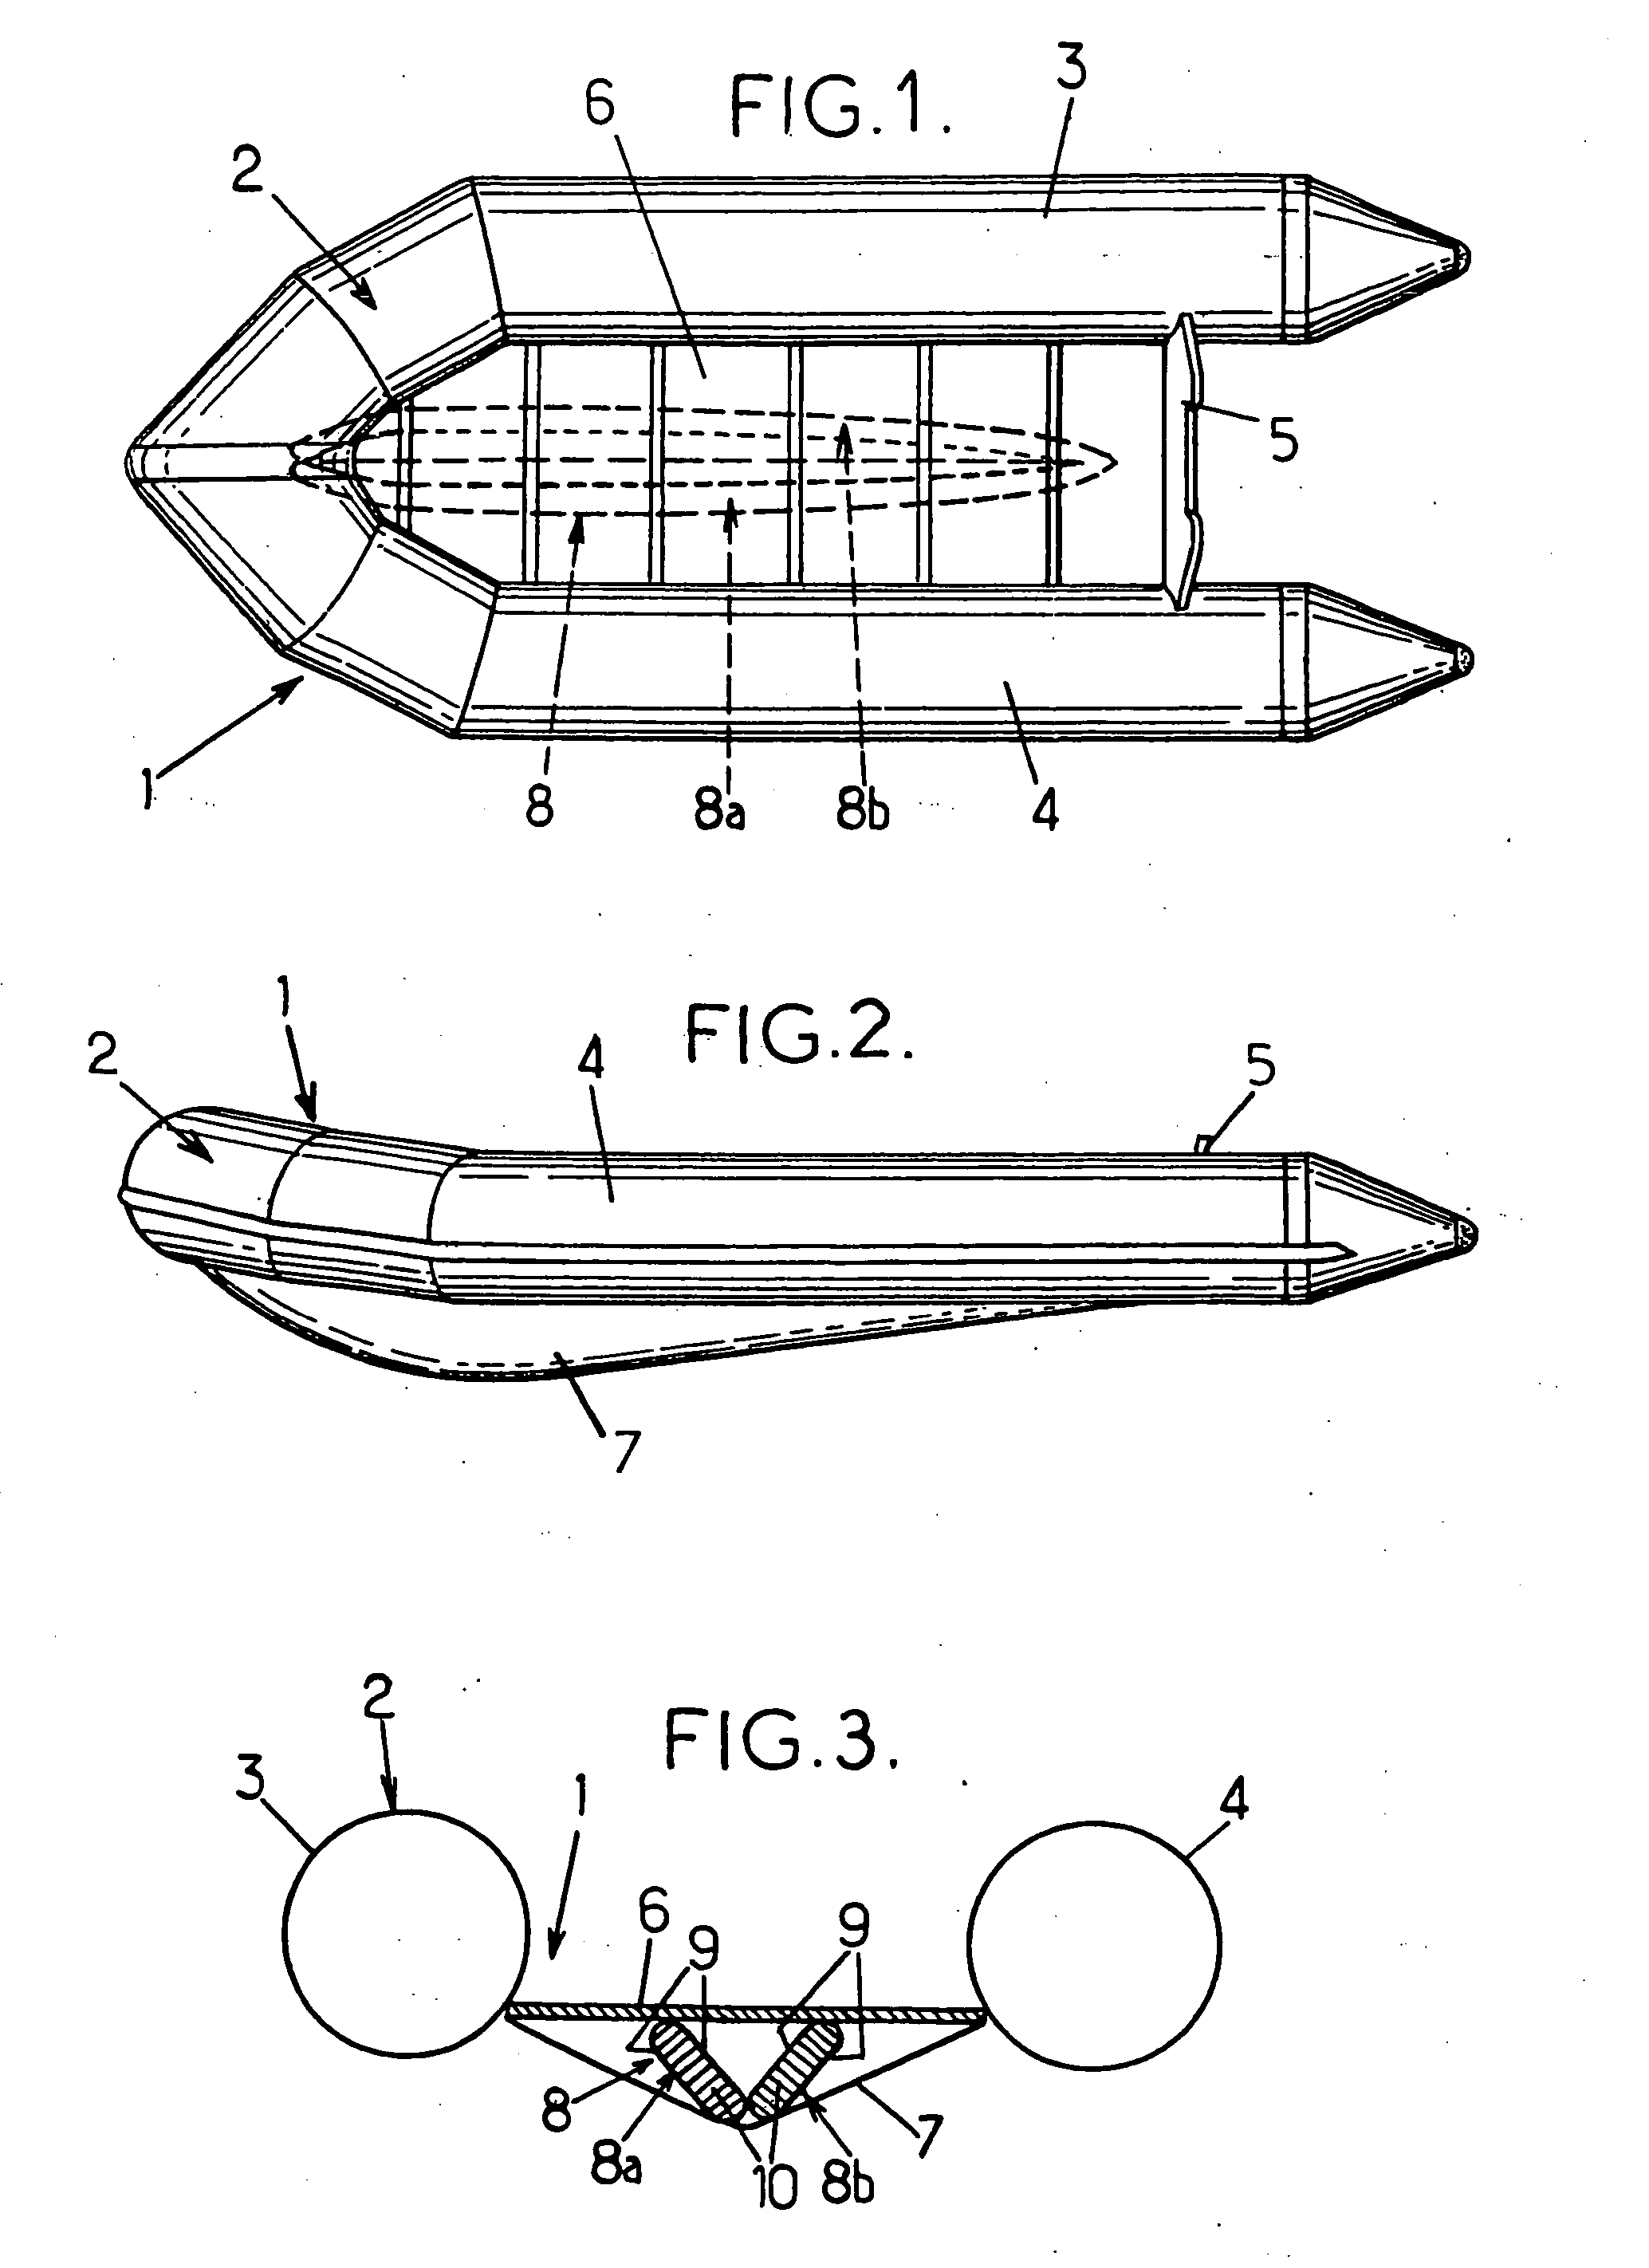 Inflatable boat with a high pressure inflatable keel